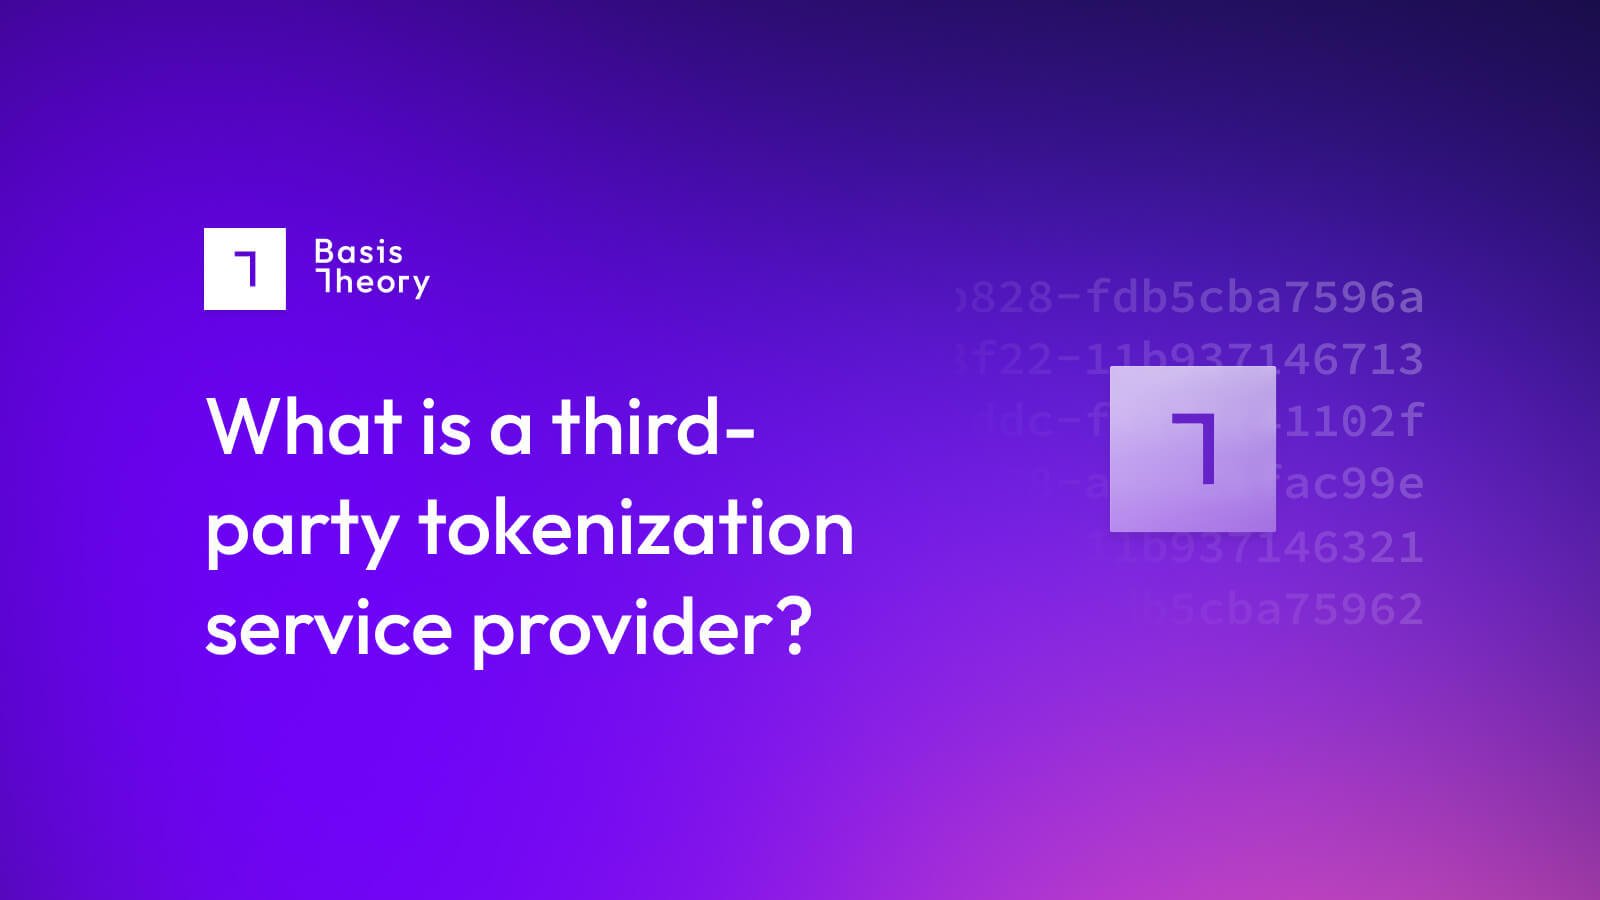 what is a third-party tokenization provider?